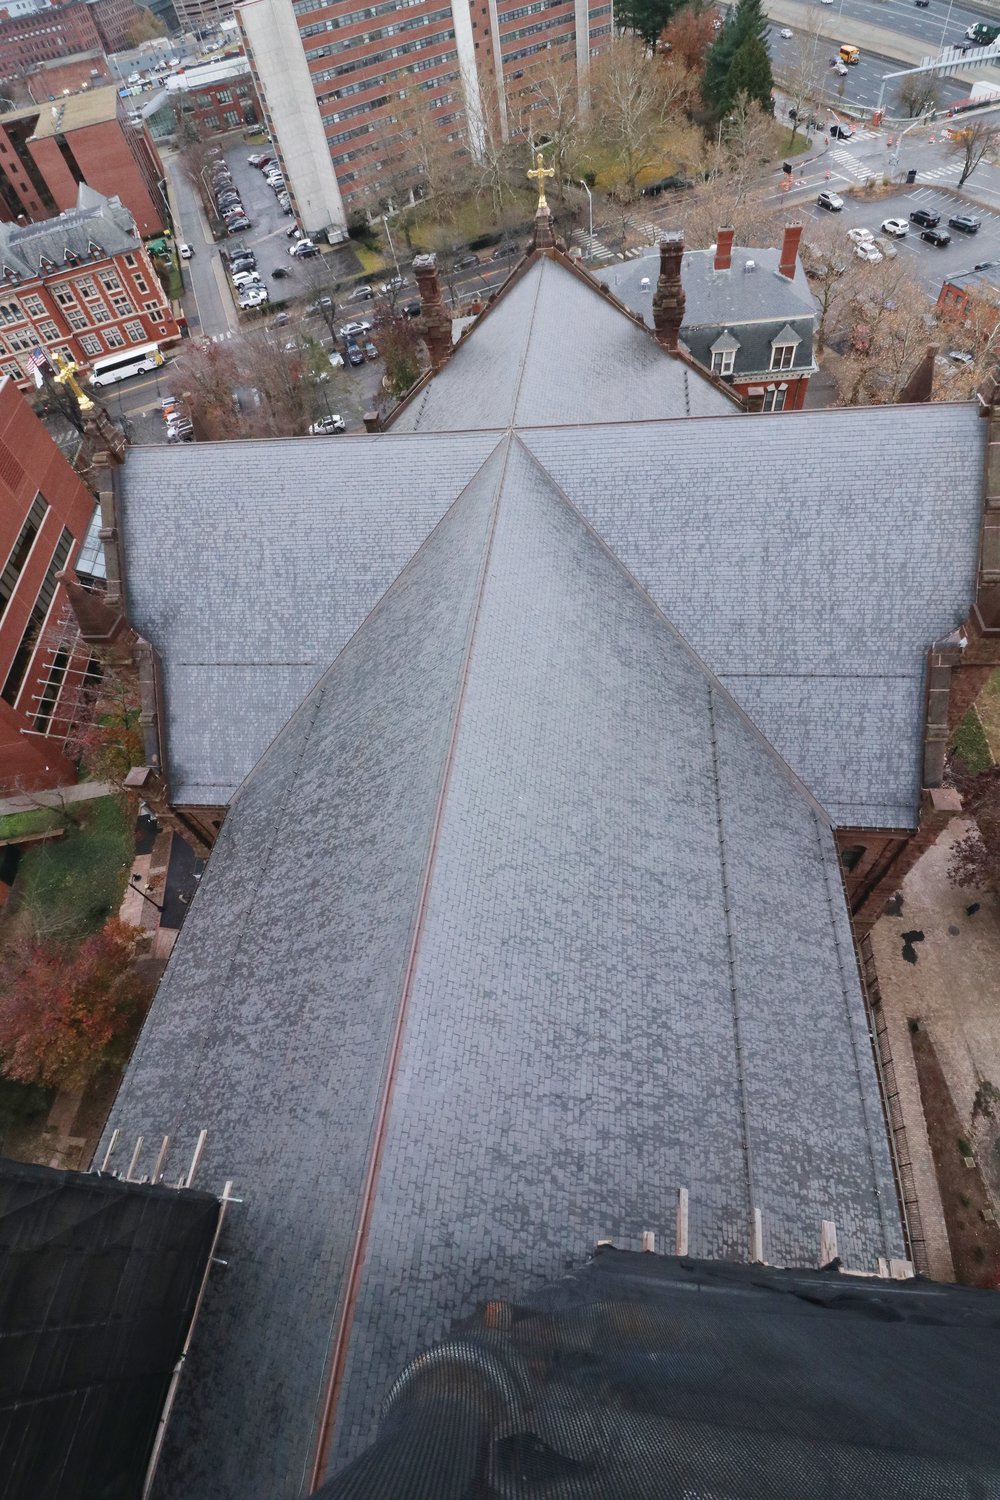 A view of the newly replaced roof of the Cathedral of SS. Peter and Paul from atop the west tower.